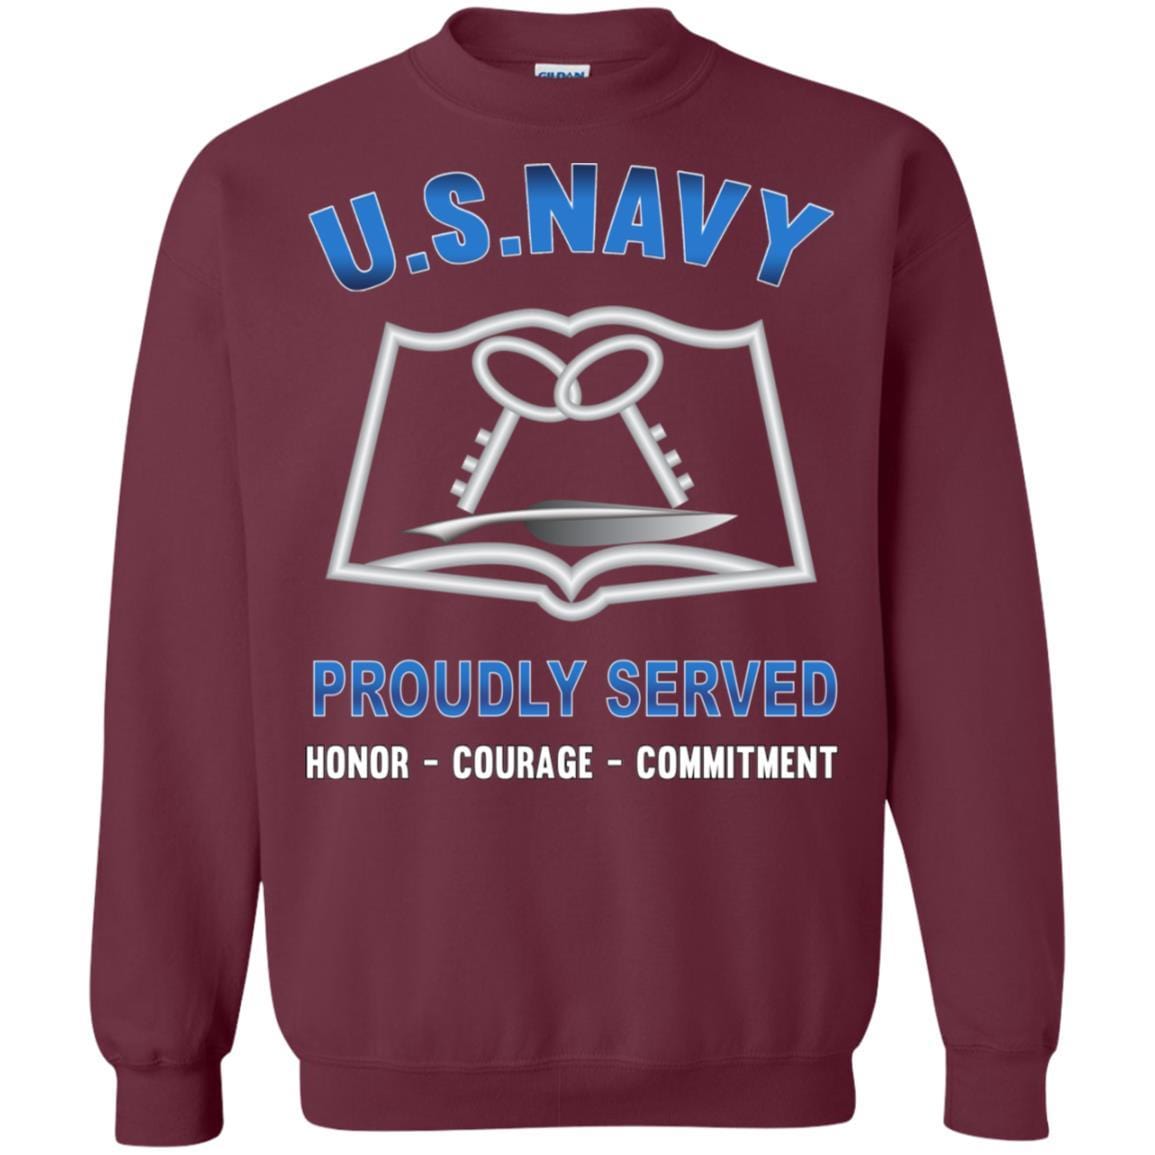 Navy Mess Management Specialist MS Navy CS - Proudly Served T-Shirt For Men On Front-TShirt-Navy-Veterans Nation